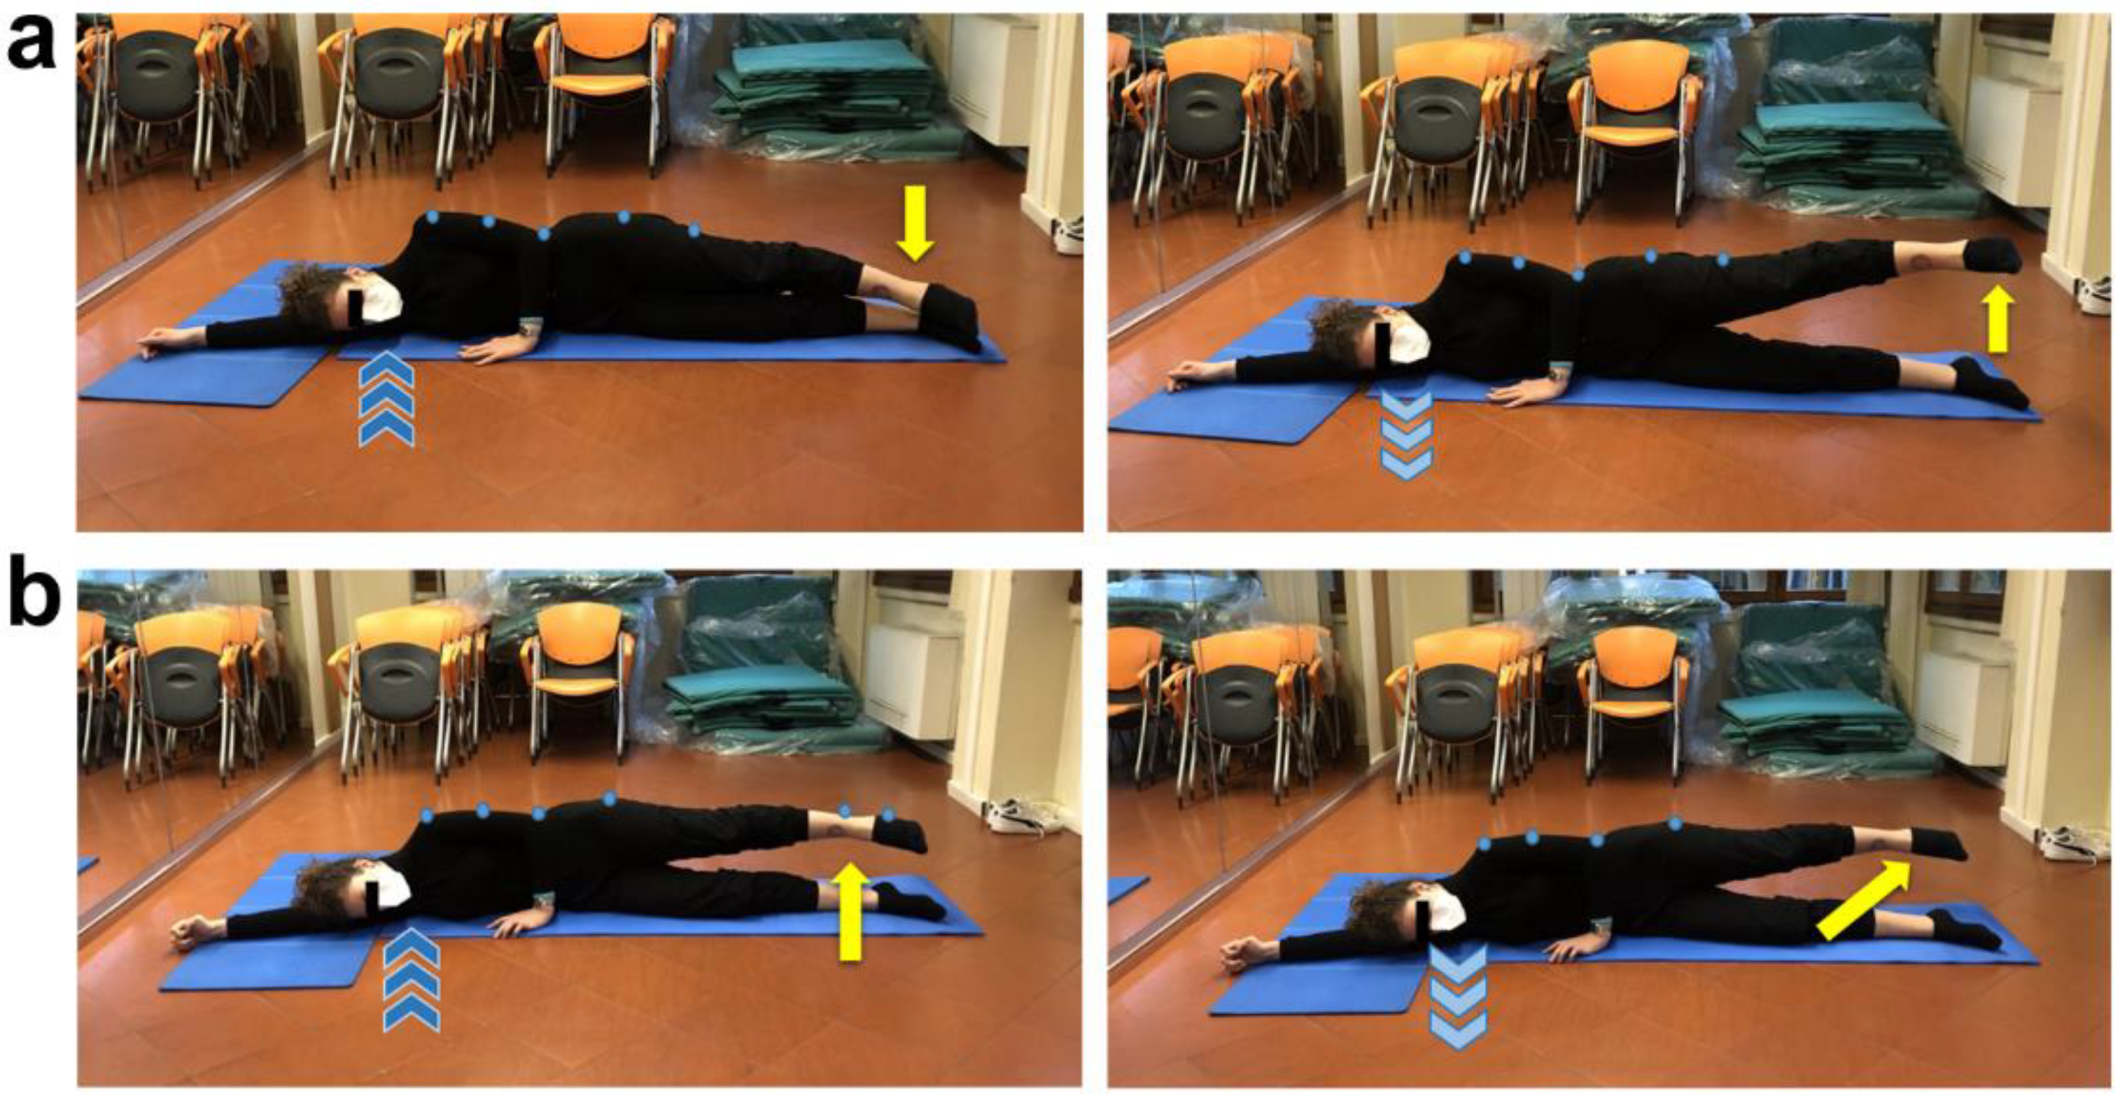 Glutes strengthening and hip mobility exercise. Supine position